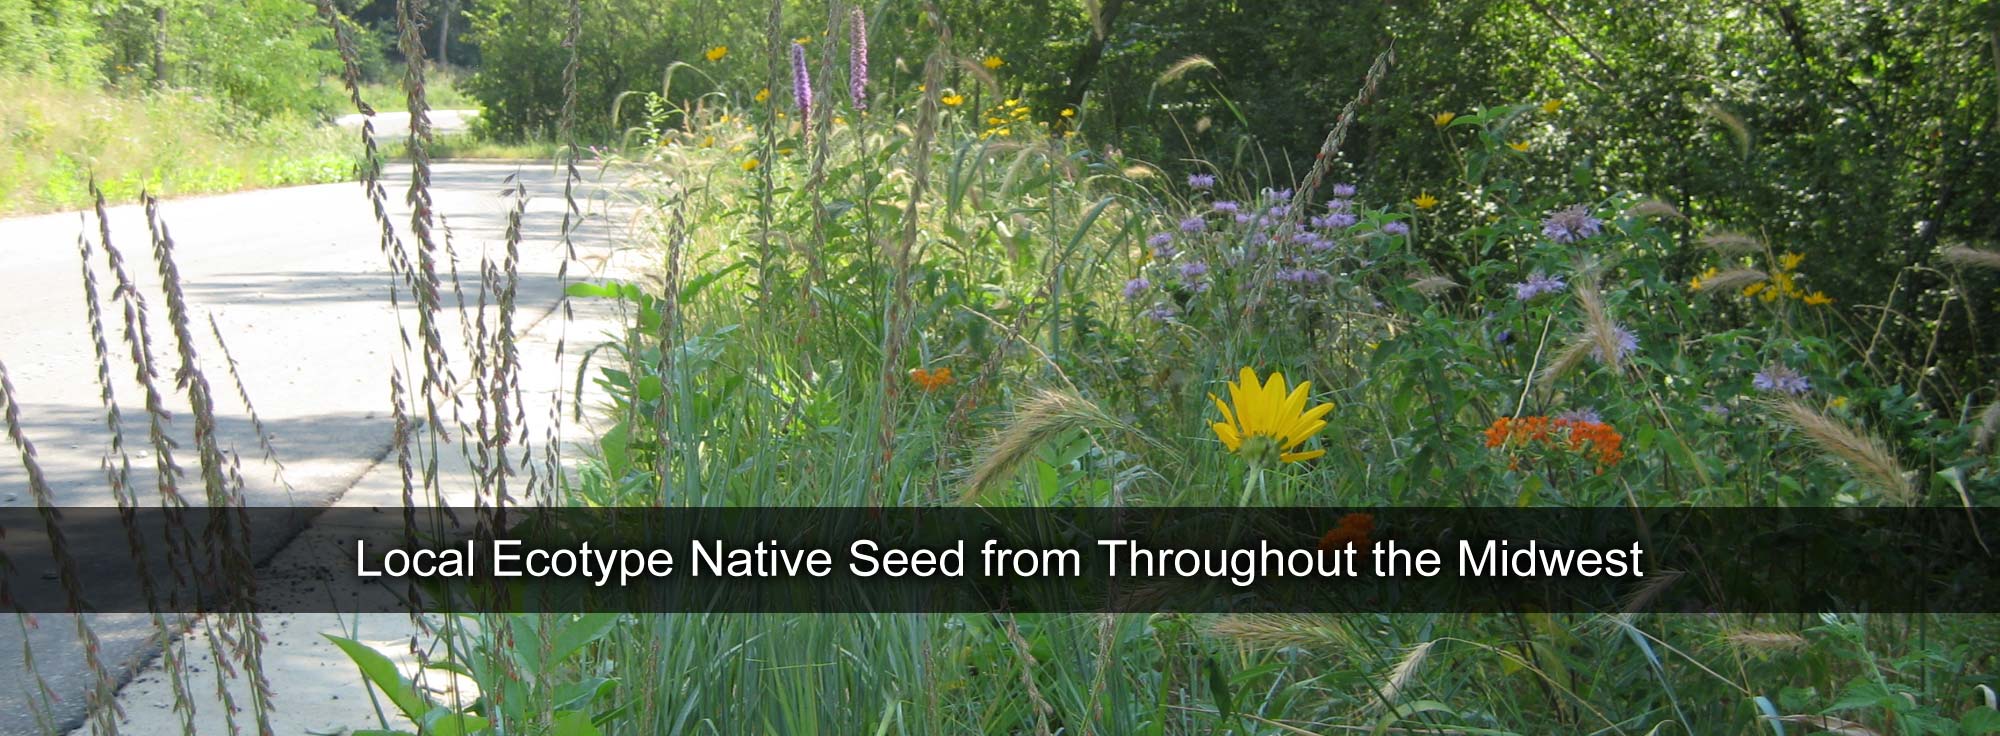 Local Ecotype Native Seed from Throughout the Midwest